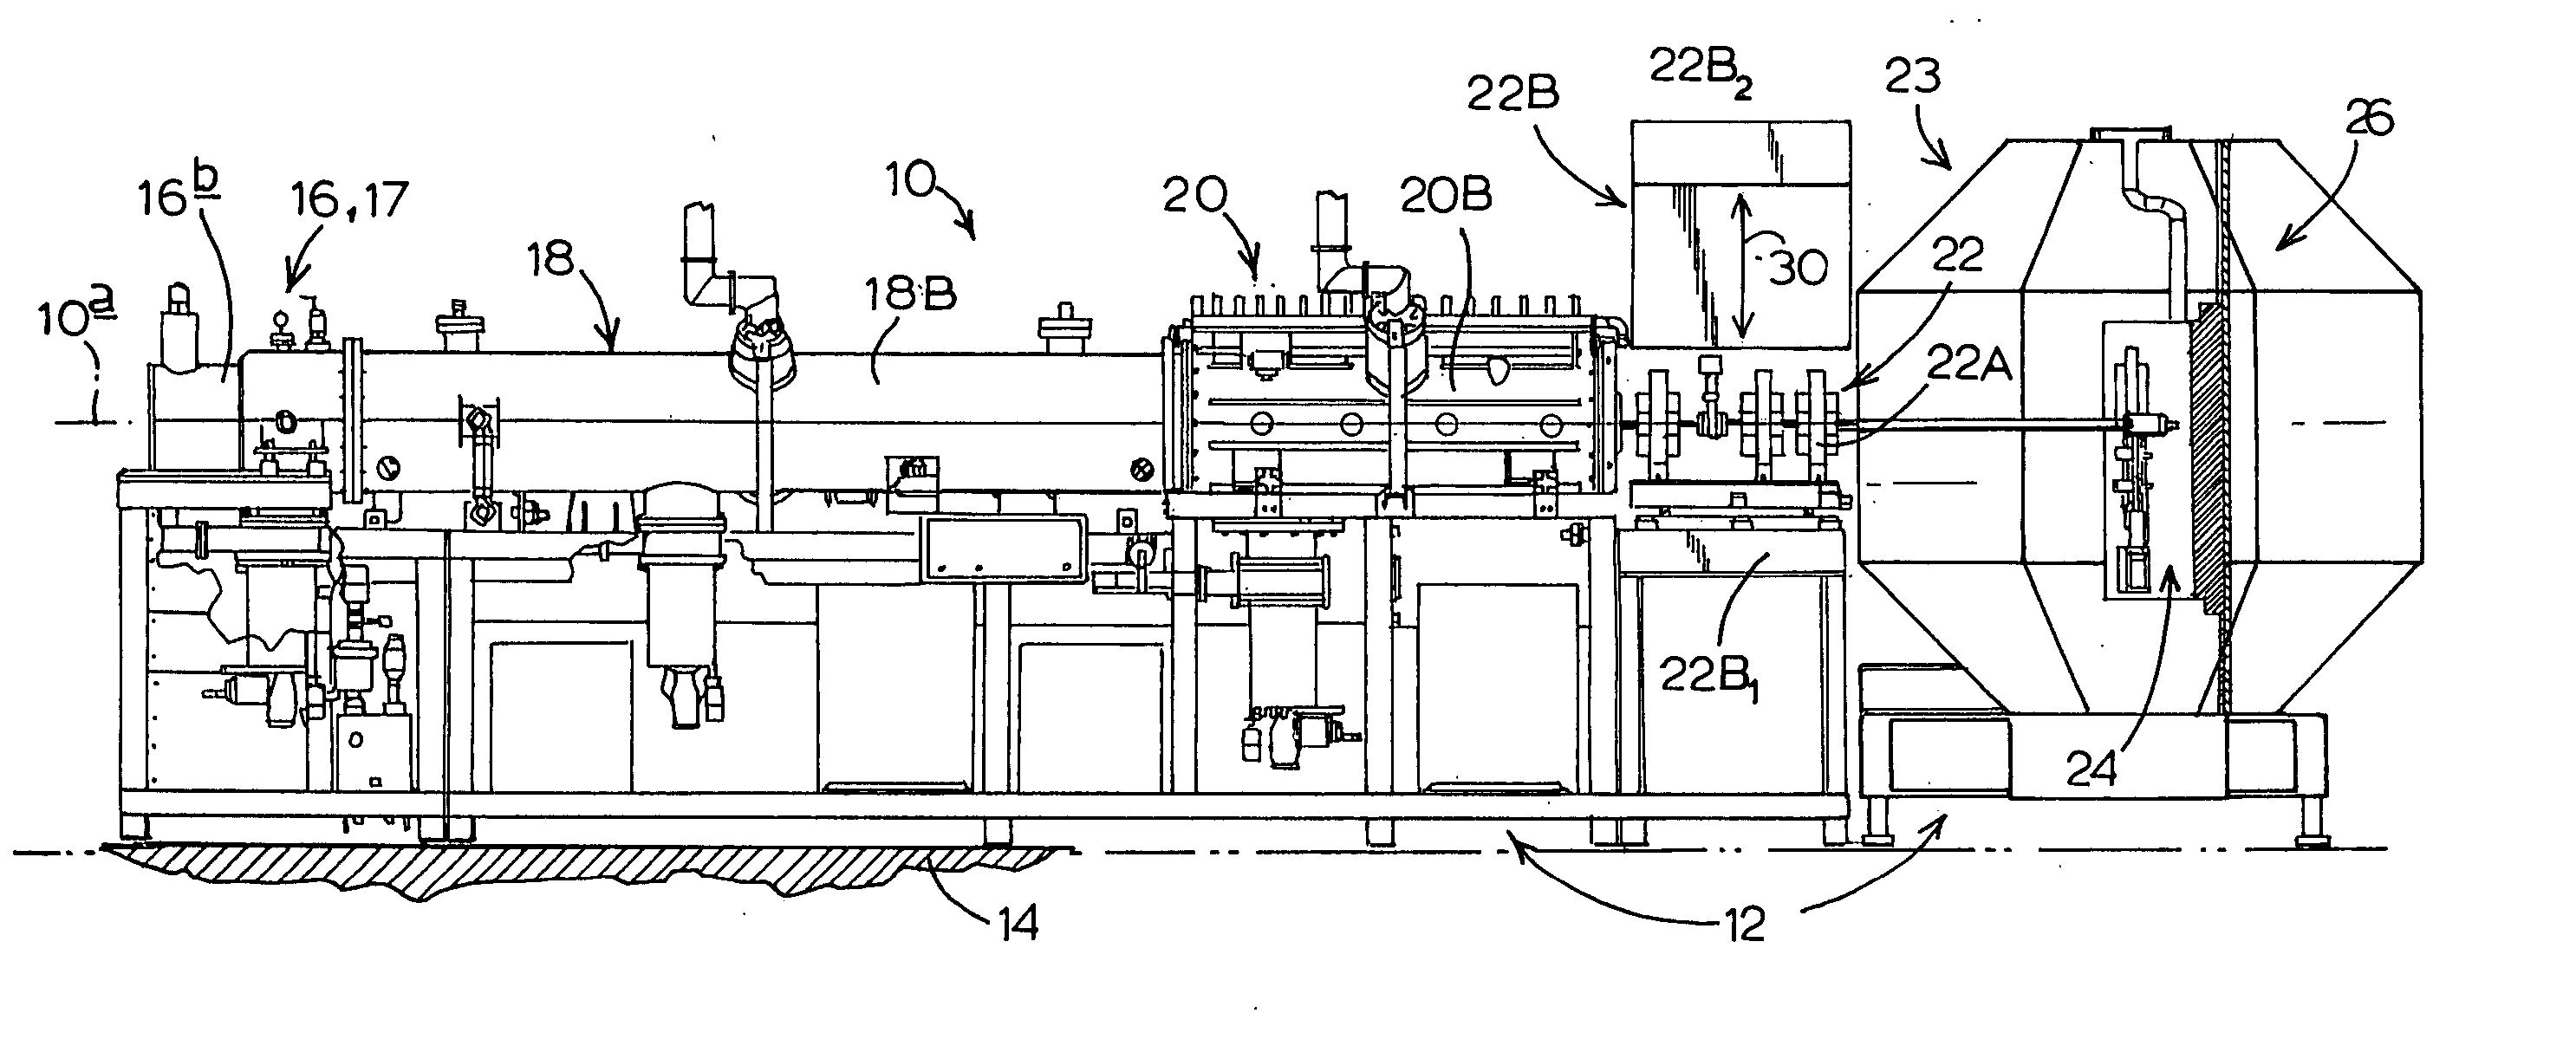 Mobile/transportable PET radioisotope system with omnidirectional self-shielding